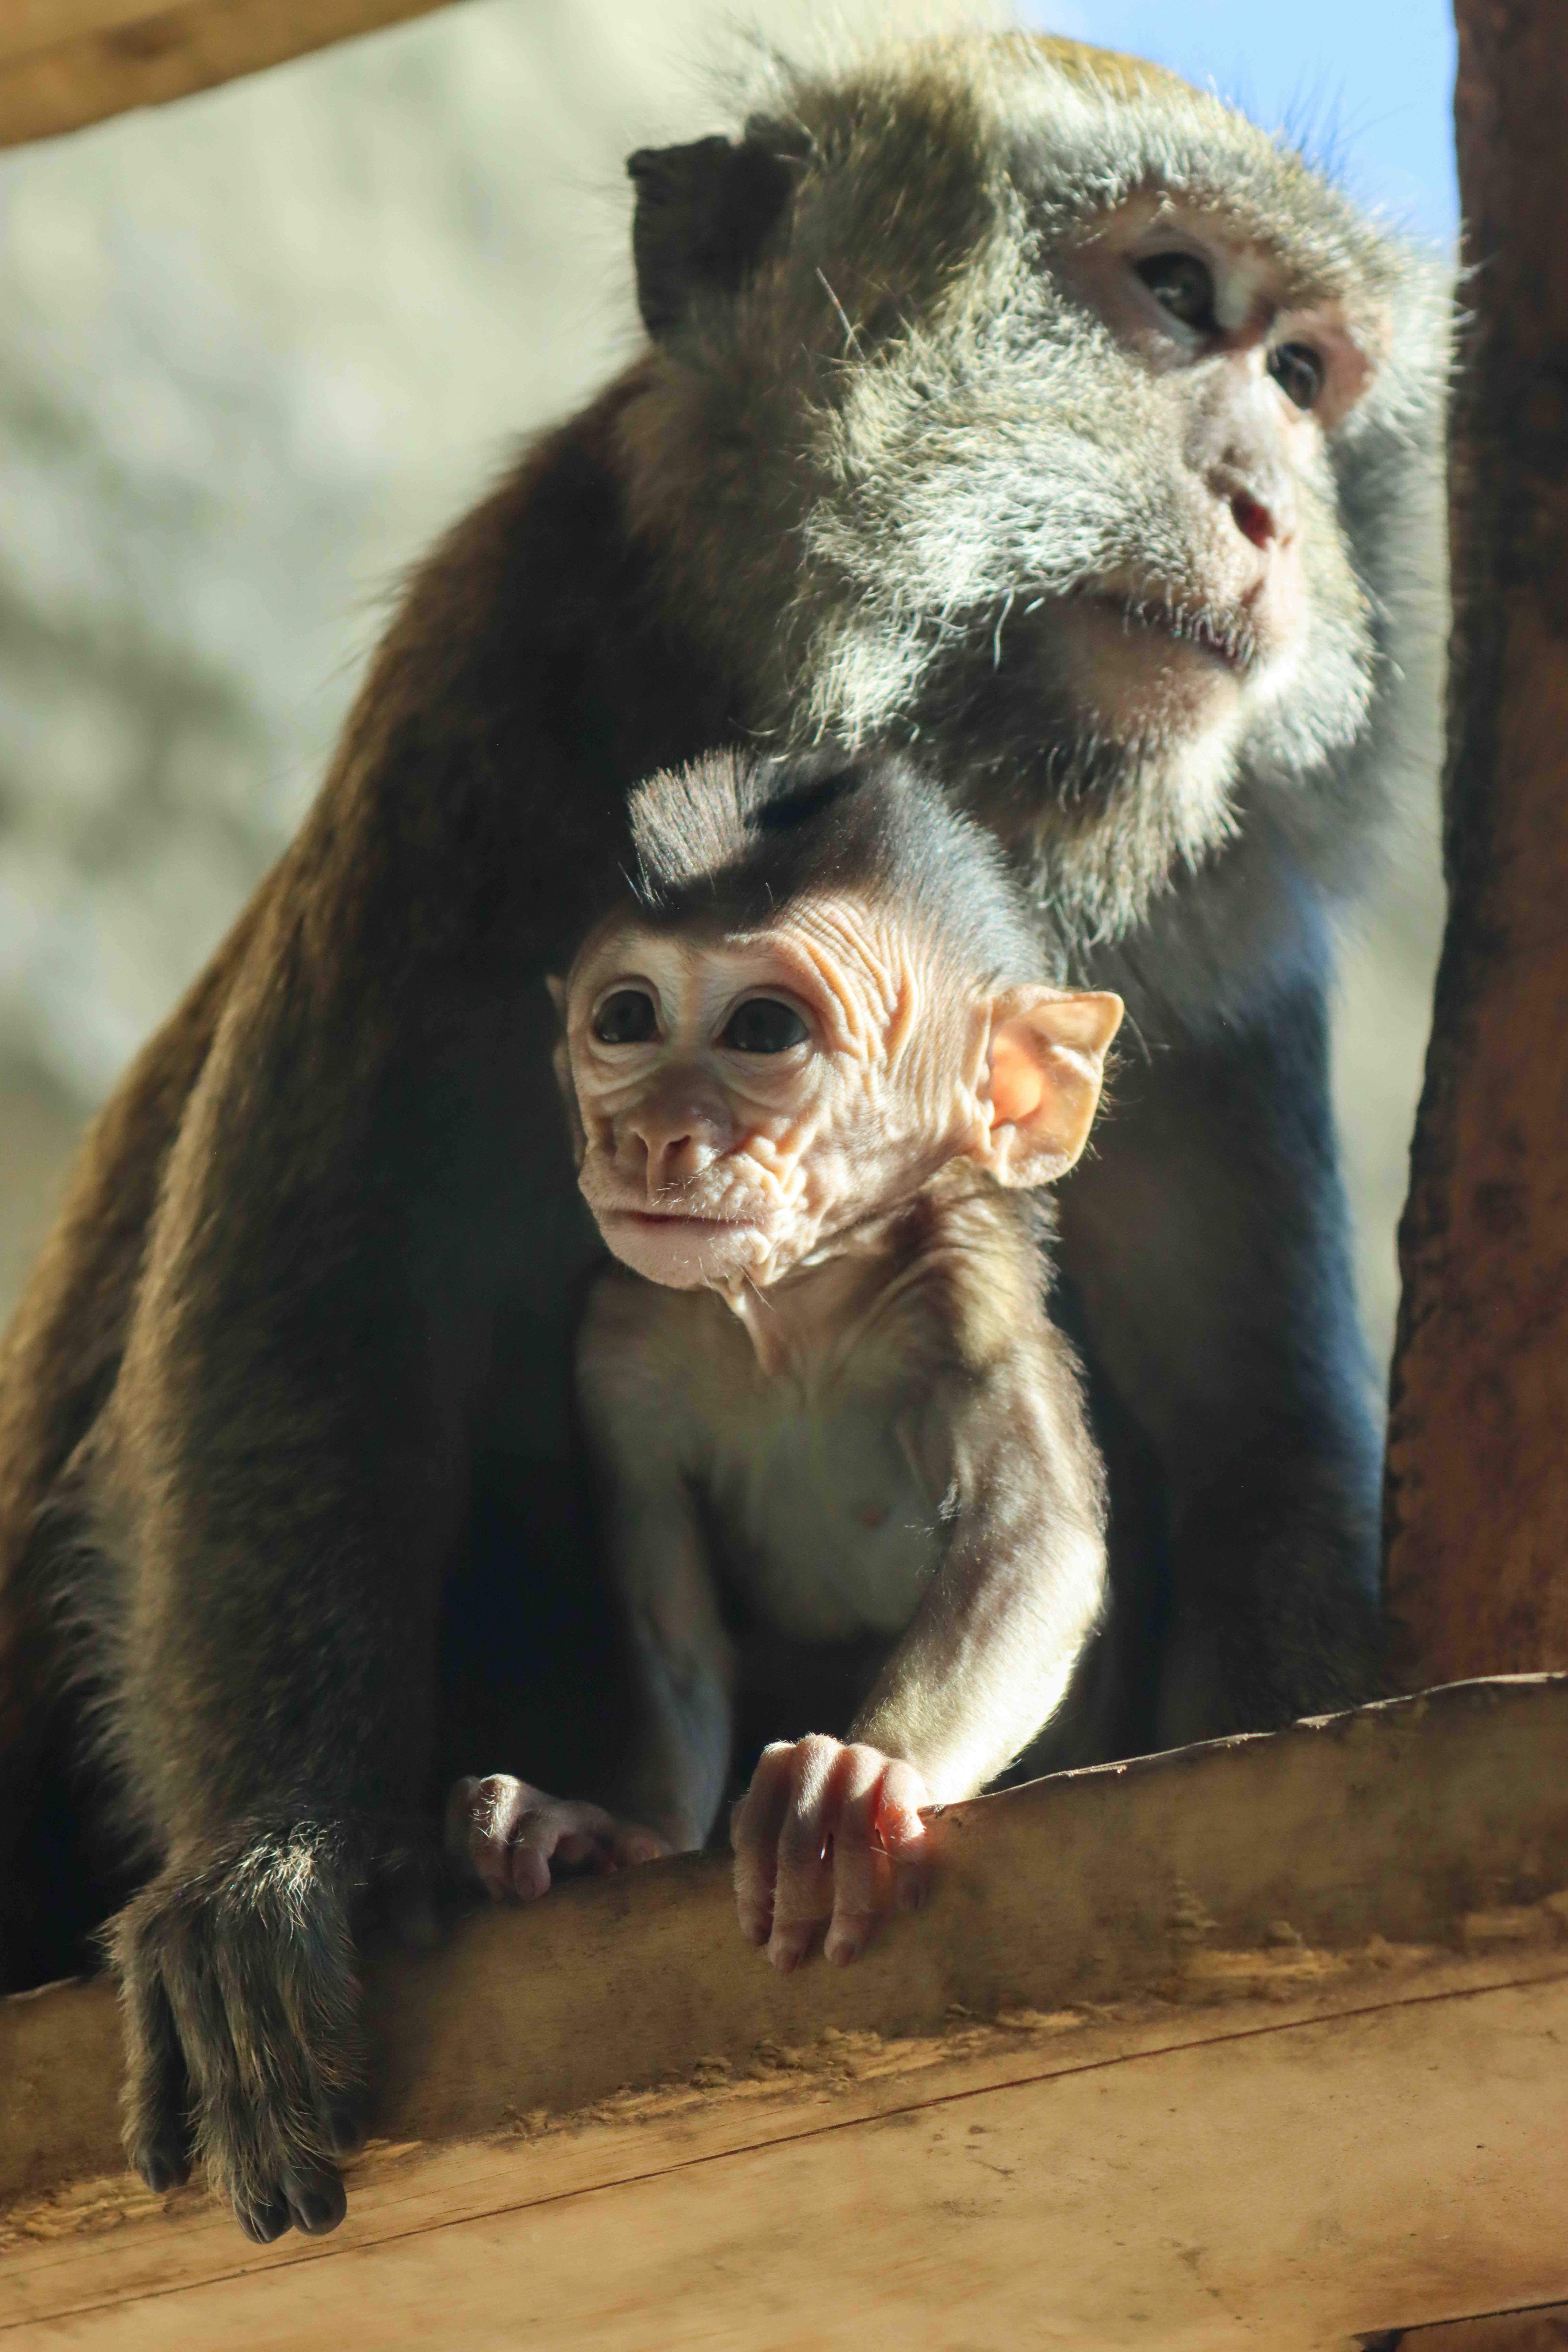 Mom and baby long-tailed macaques are perched on a ladder rung inside a zoo exhibit.